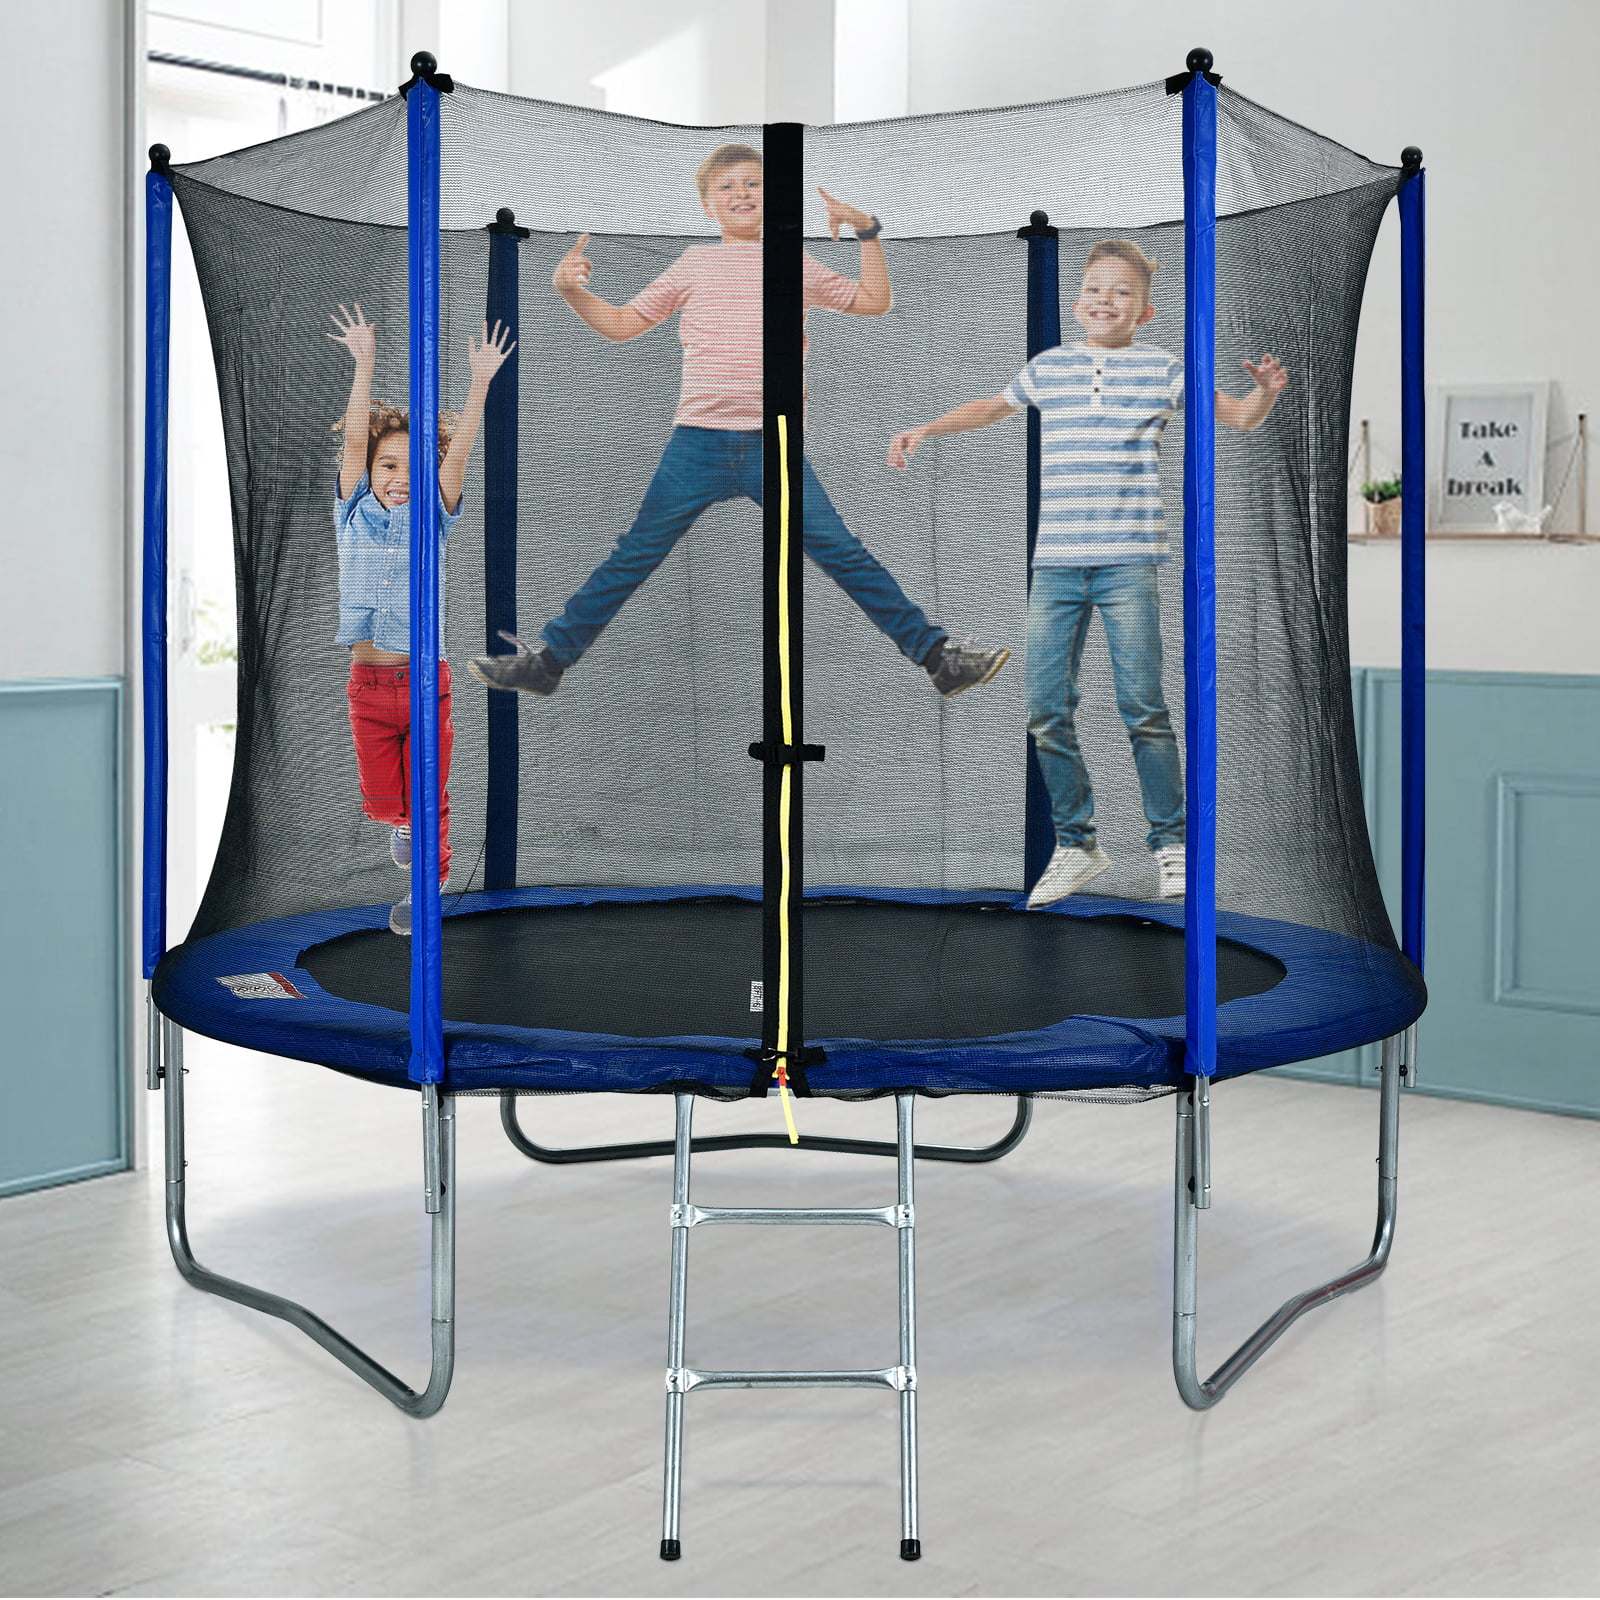 GoolRC 10FT Round Trampoline for Kids with Safety Enclosure Net, Outdoor Backyard Trampoline with Ladder, Blue